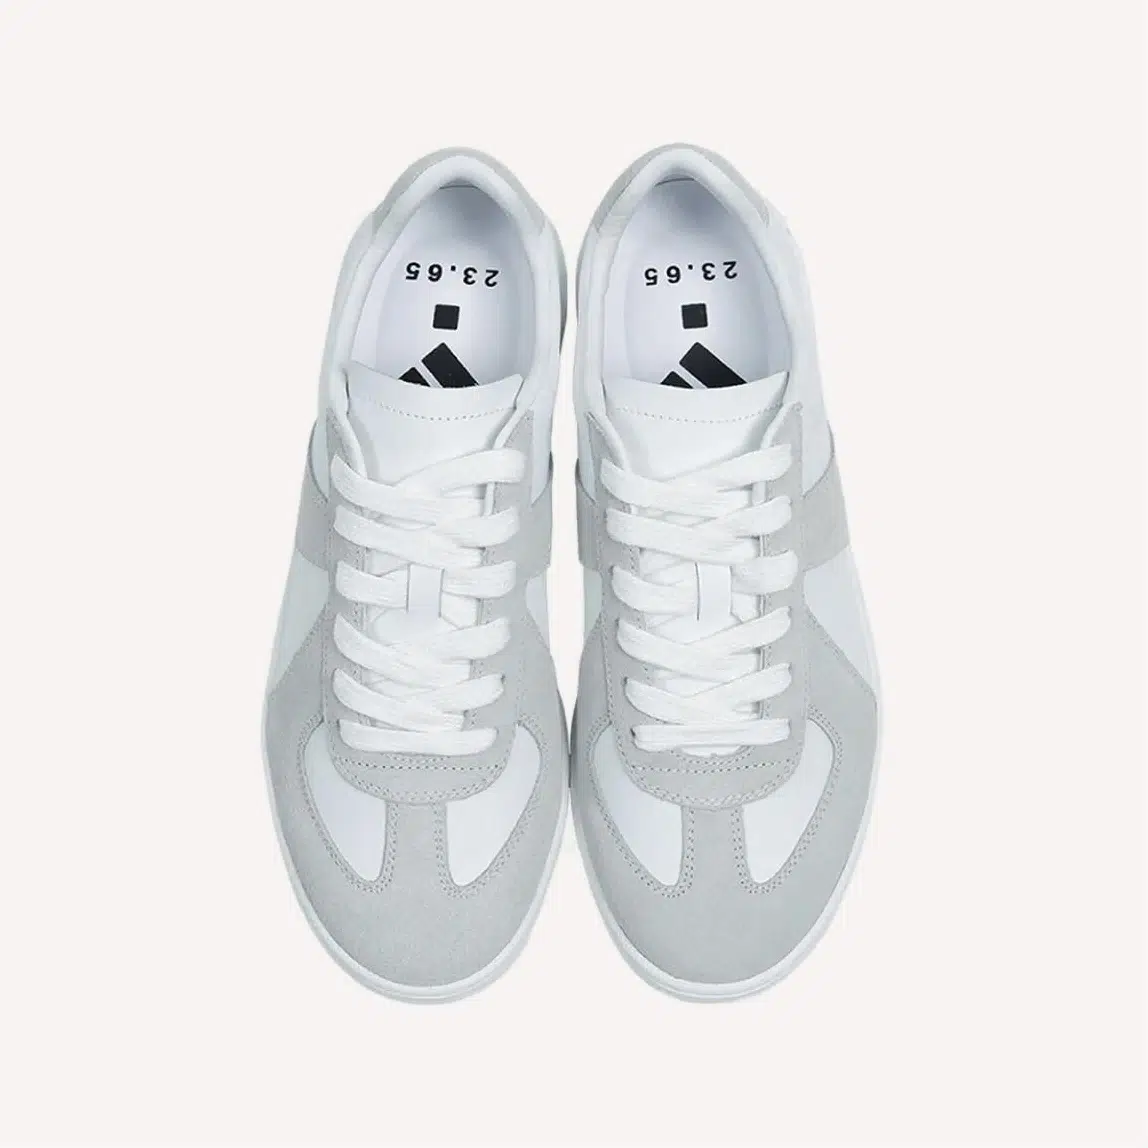 Another Generation German Army Trainers White Gray